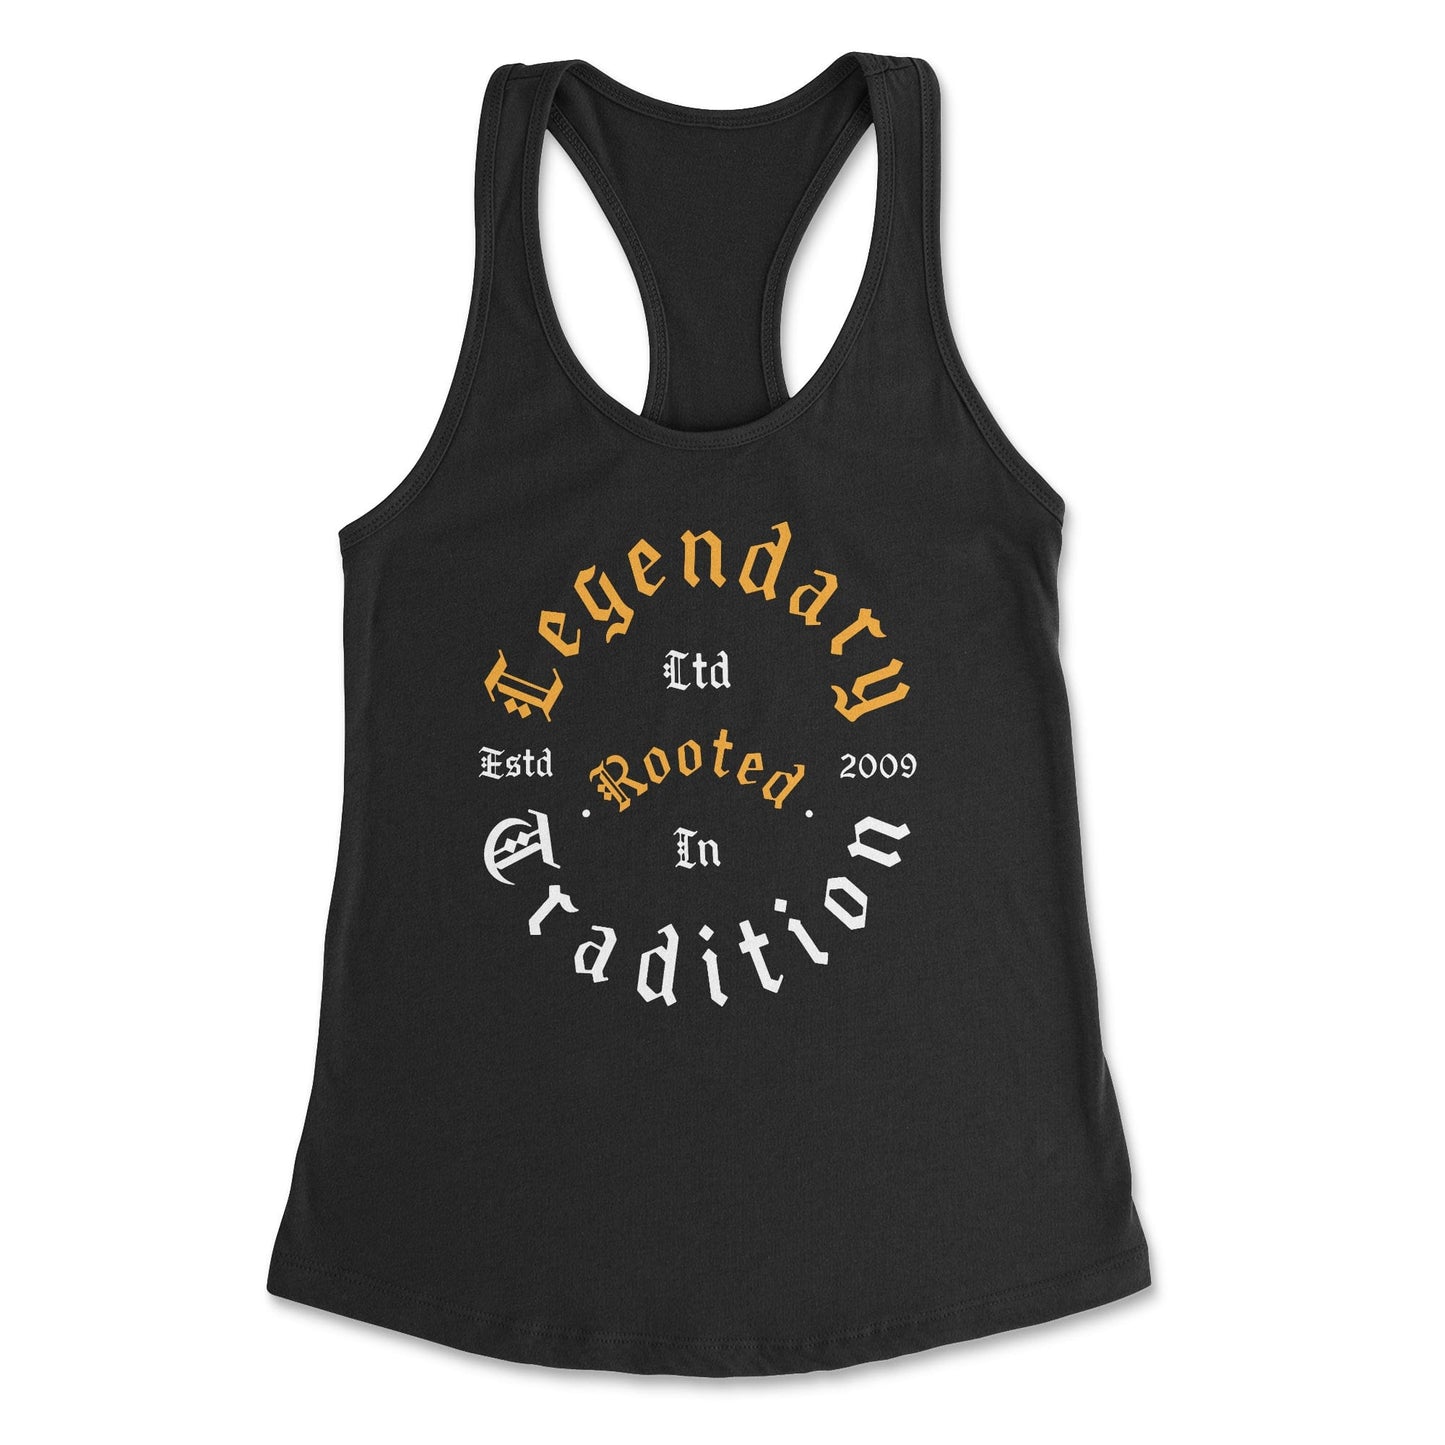 Legendary ltd. Rooted in Tradition Racerback Tank